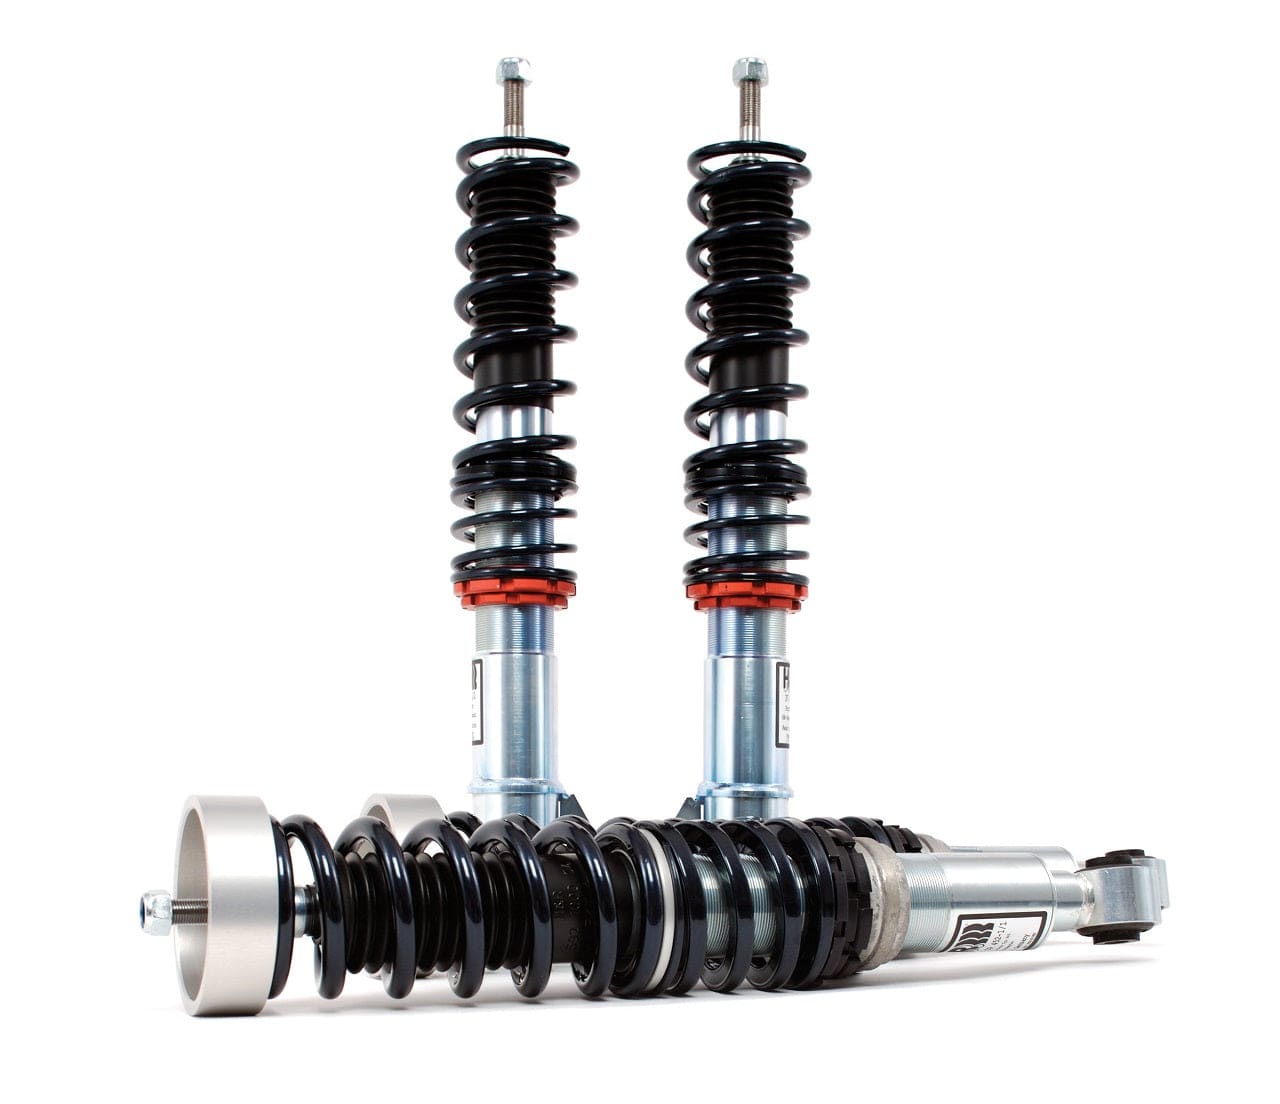 H&R RSS Coilovers for 2005-2009 Ford Mustang Shelby GT V6/V8 RSS29170